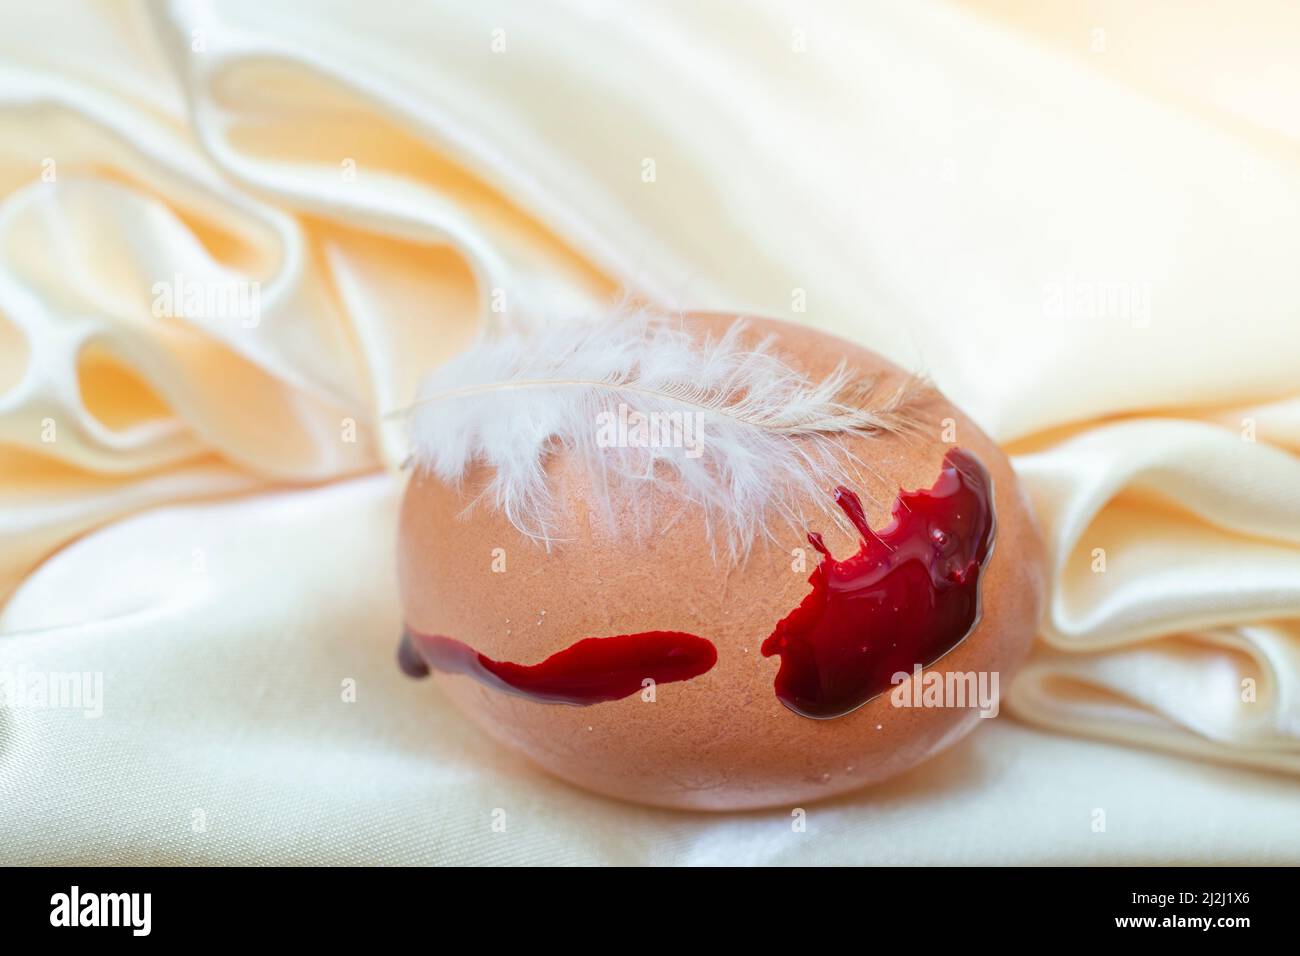 one chicken egg wit a feather and blood like paint, on beige satin folds Stock Photo